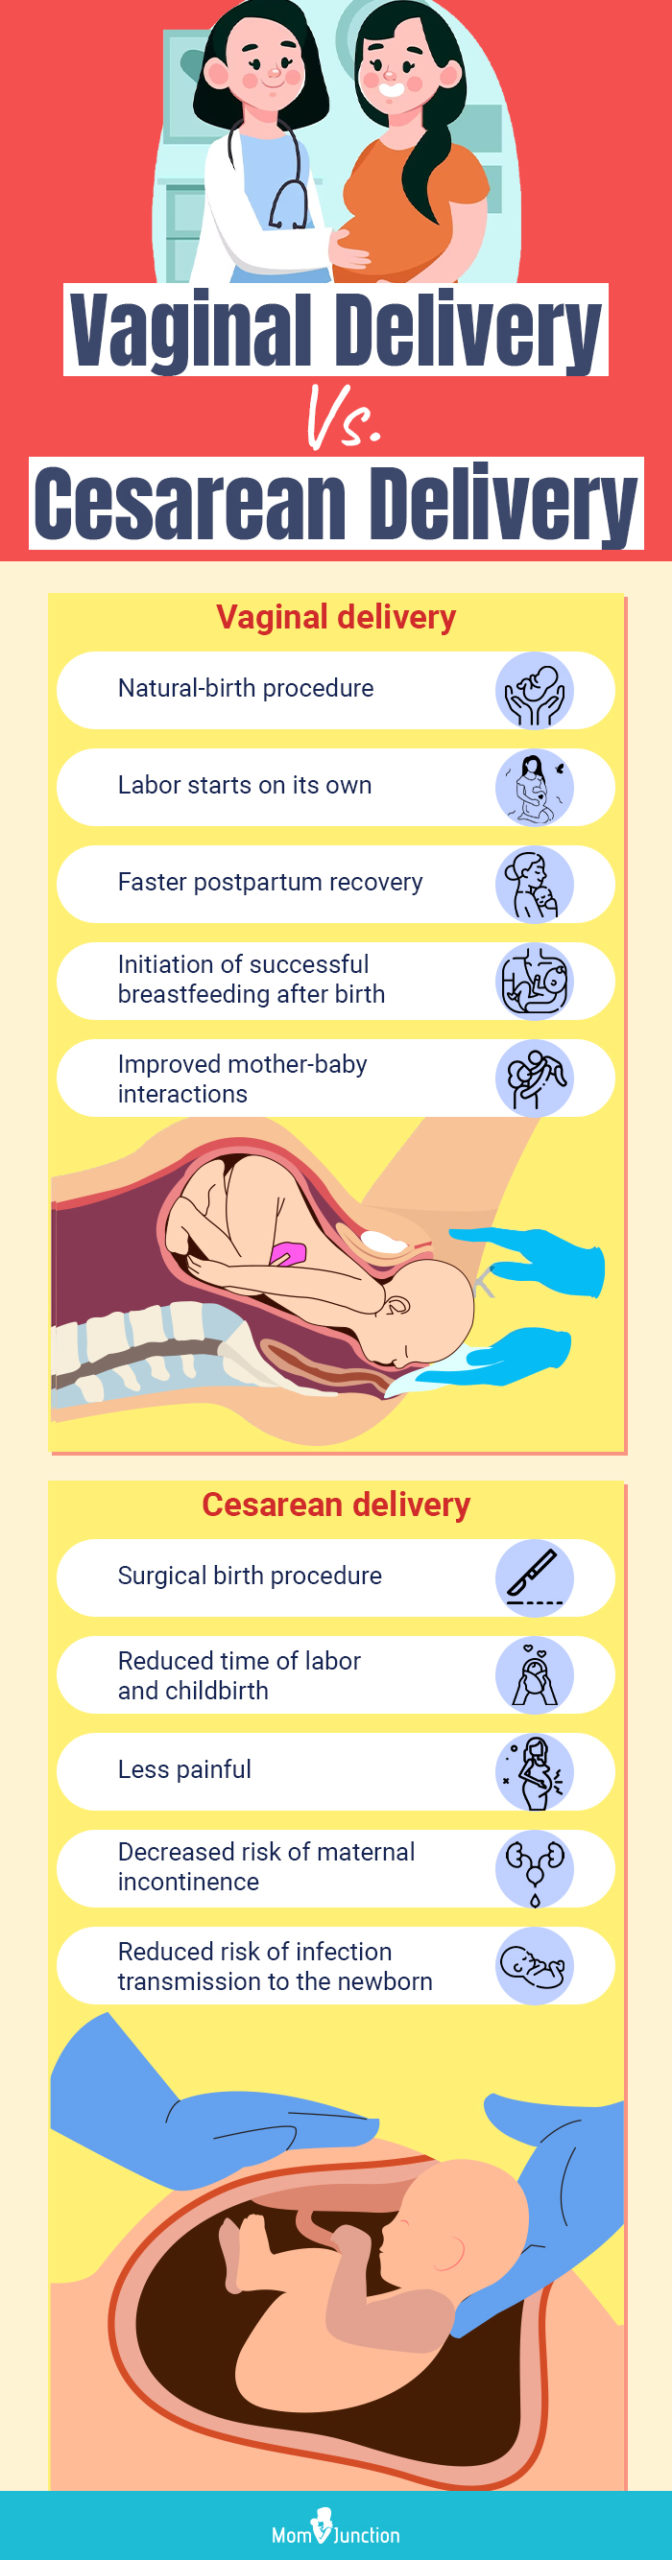 C-Section and Normal Delivery: These are the differences